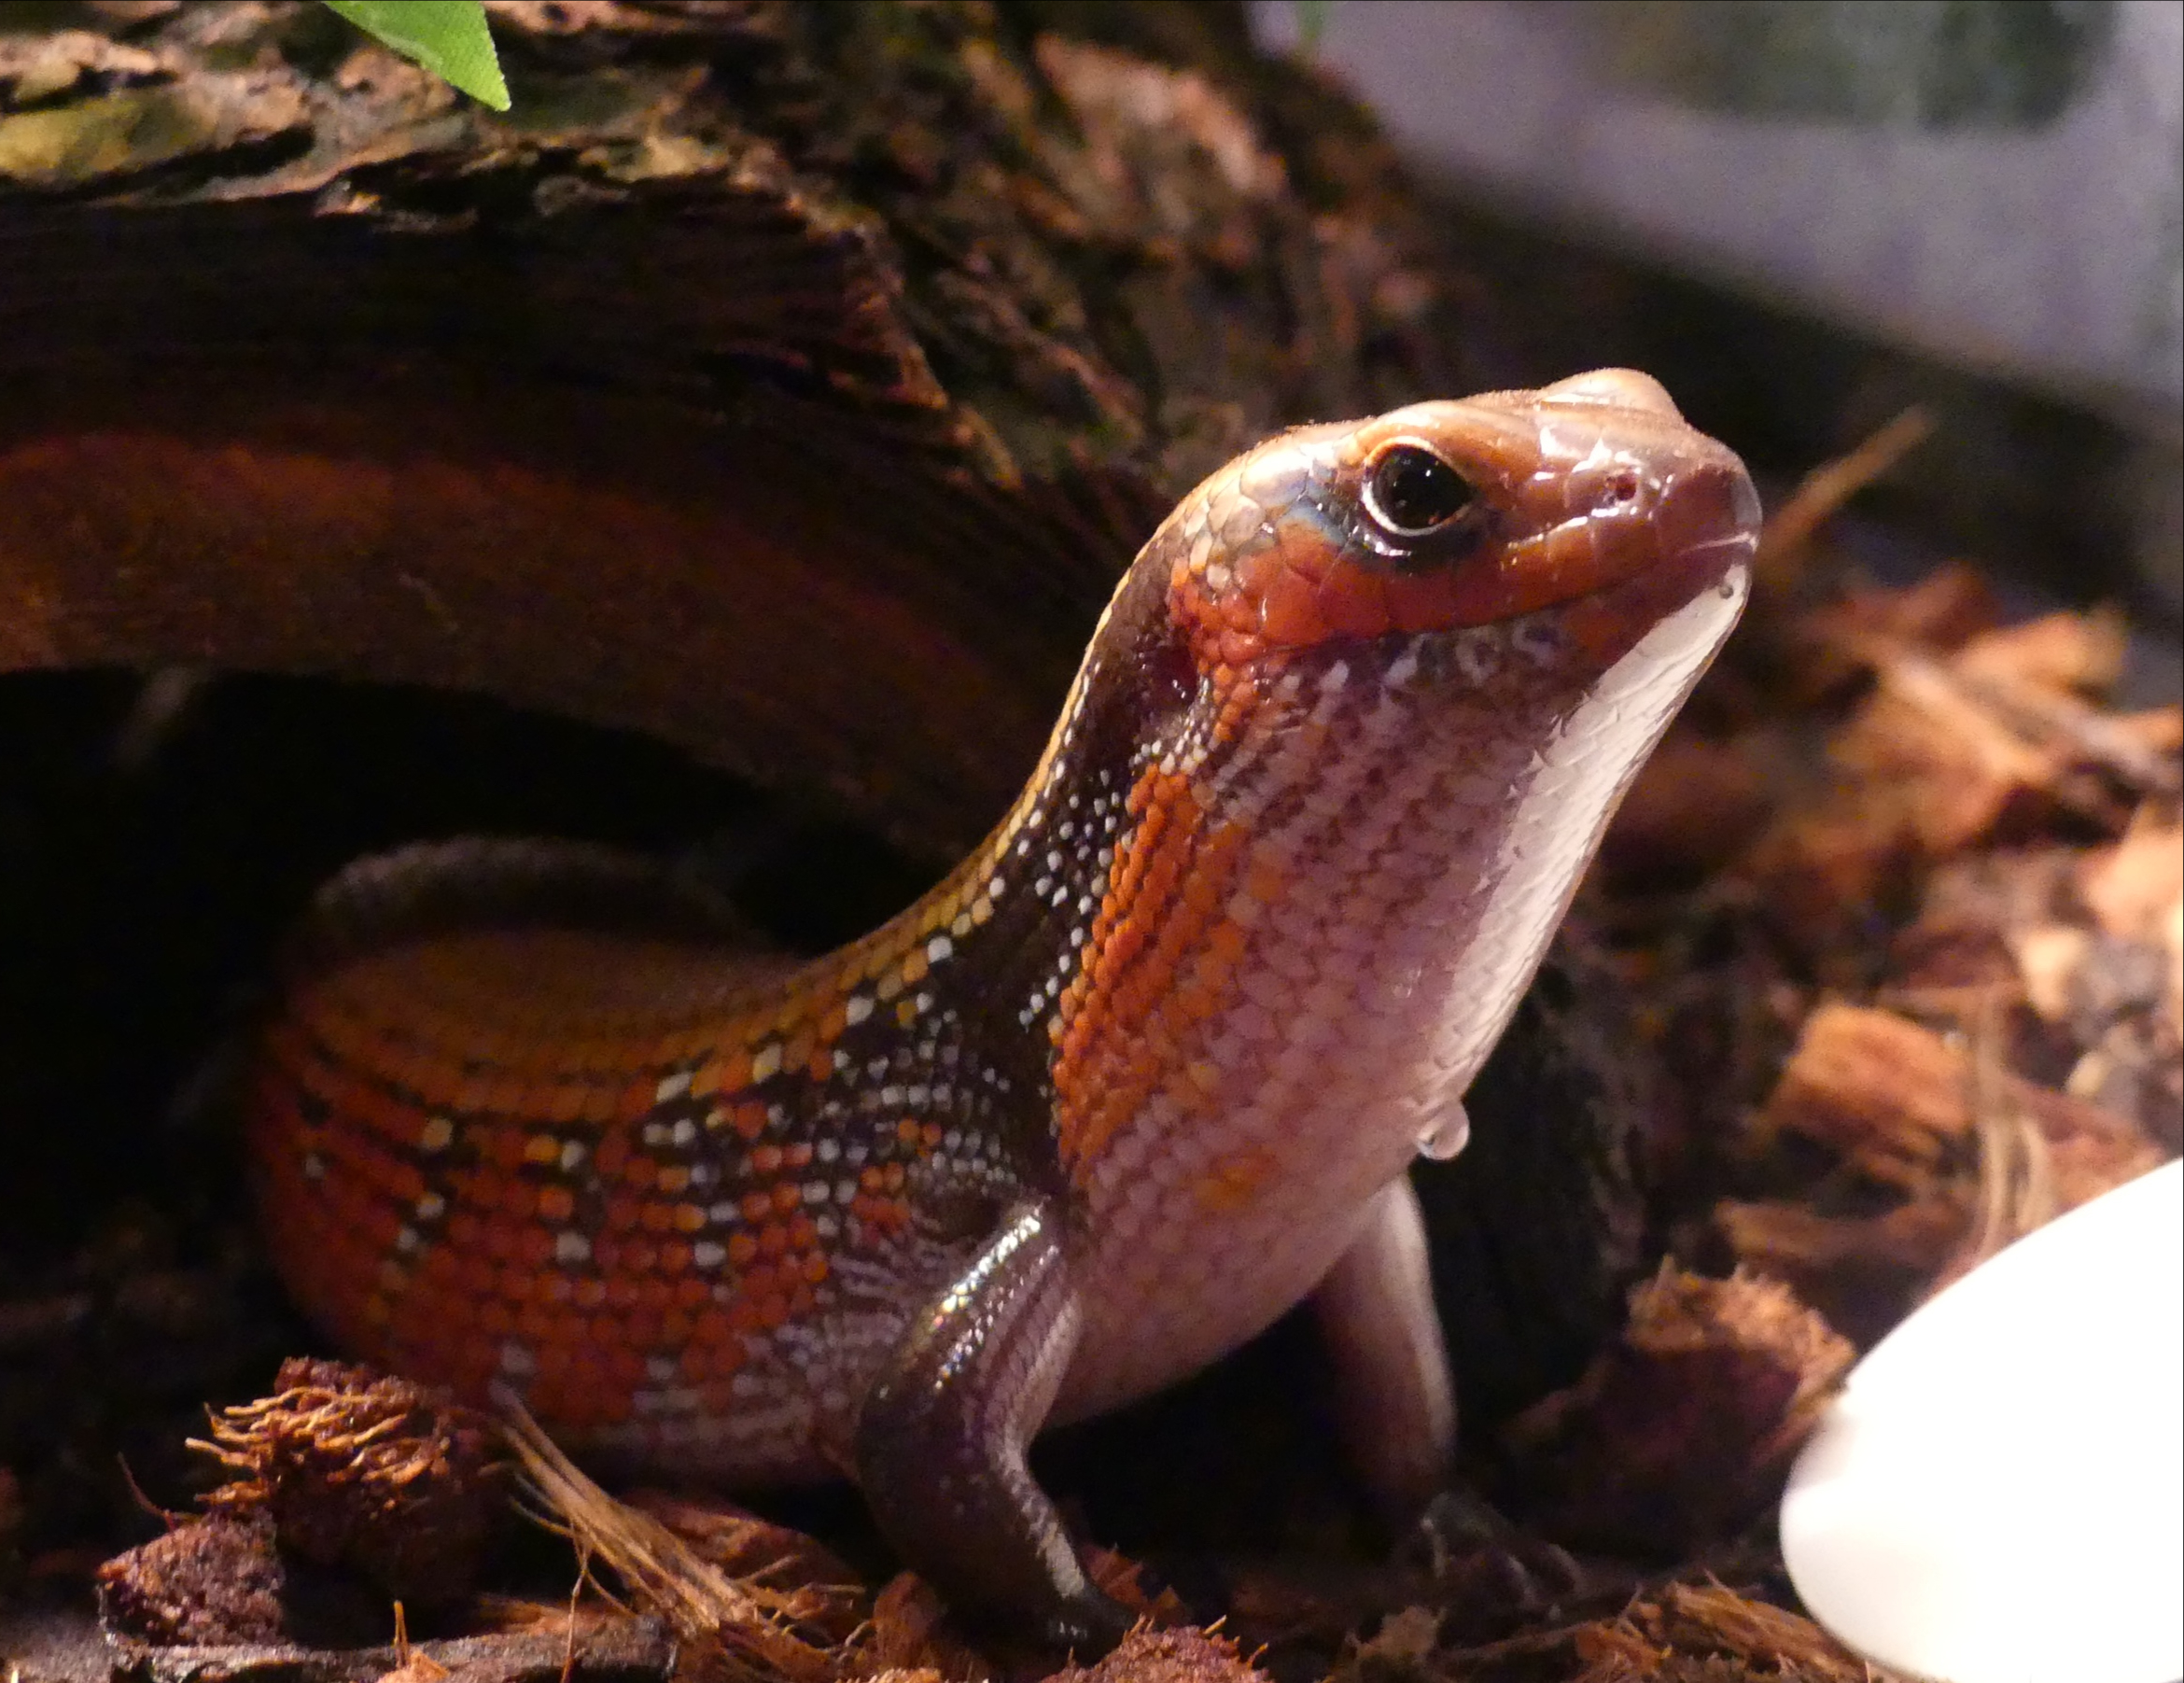 Moto, the red and black African fire skink, pokes his head out from under a log.